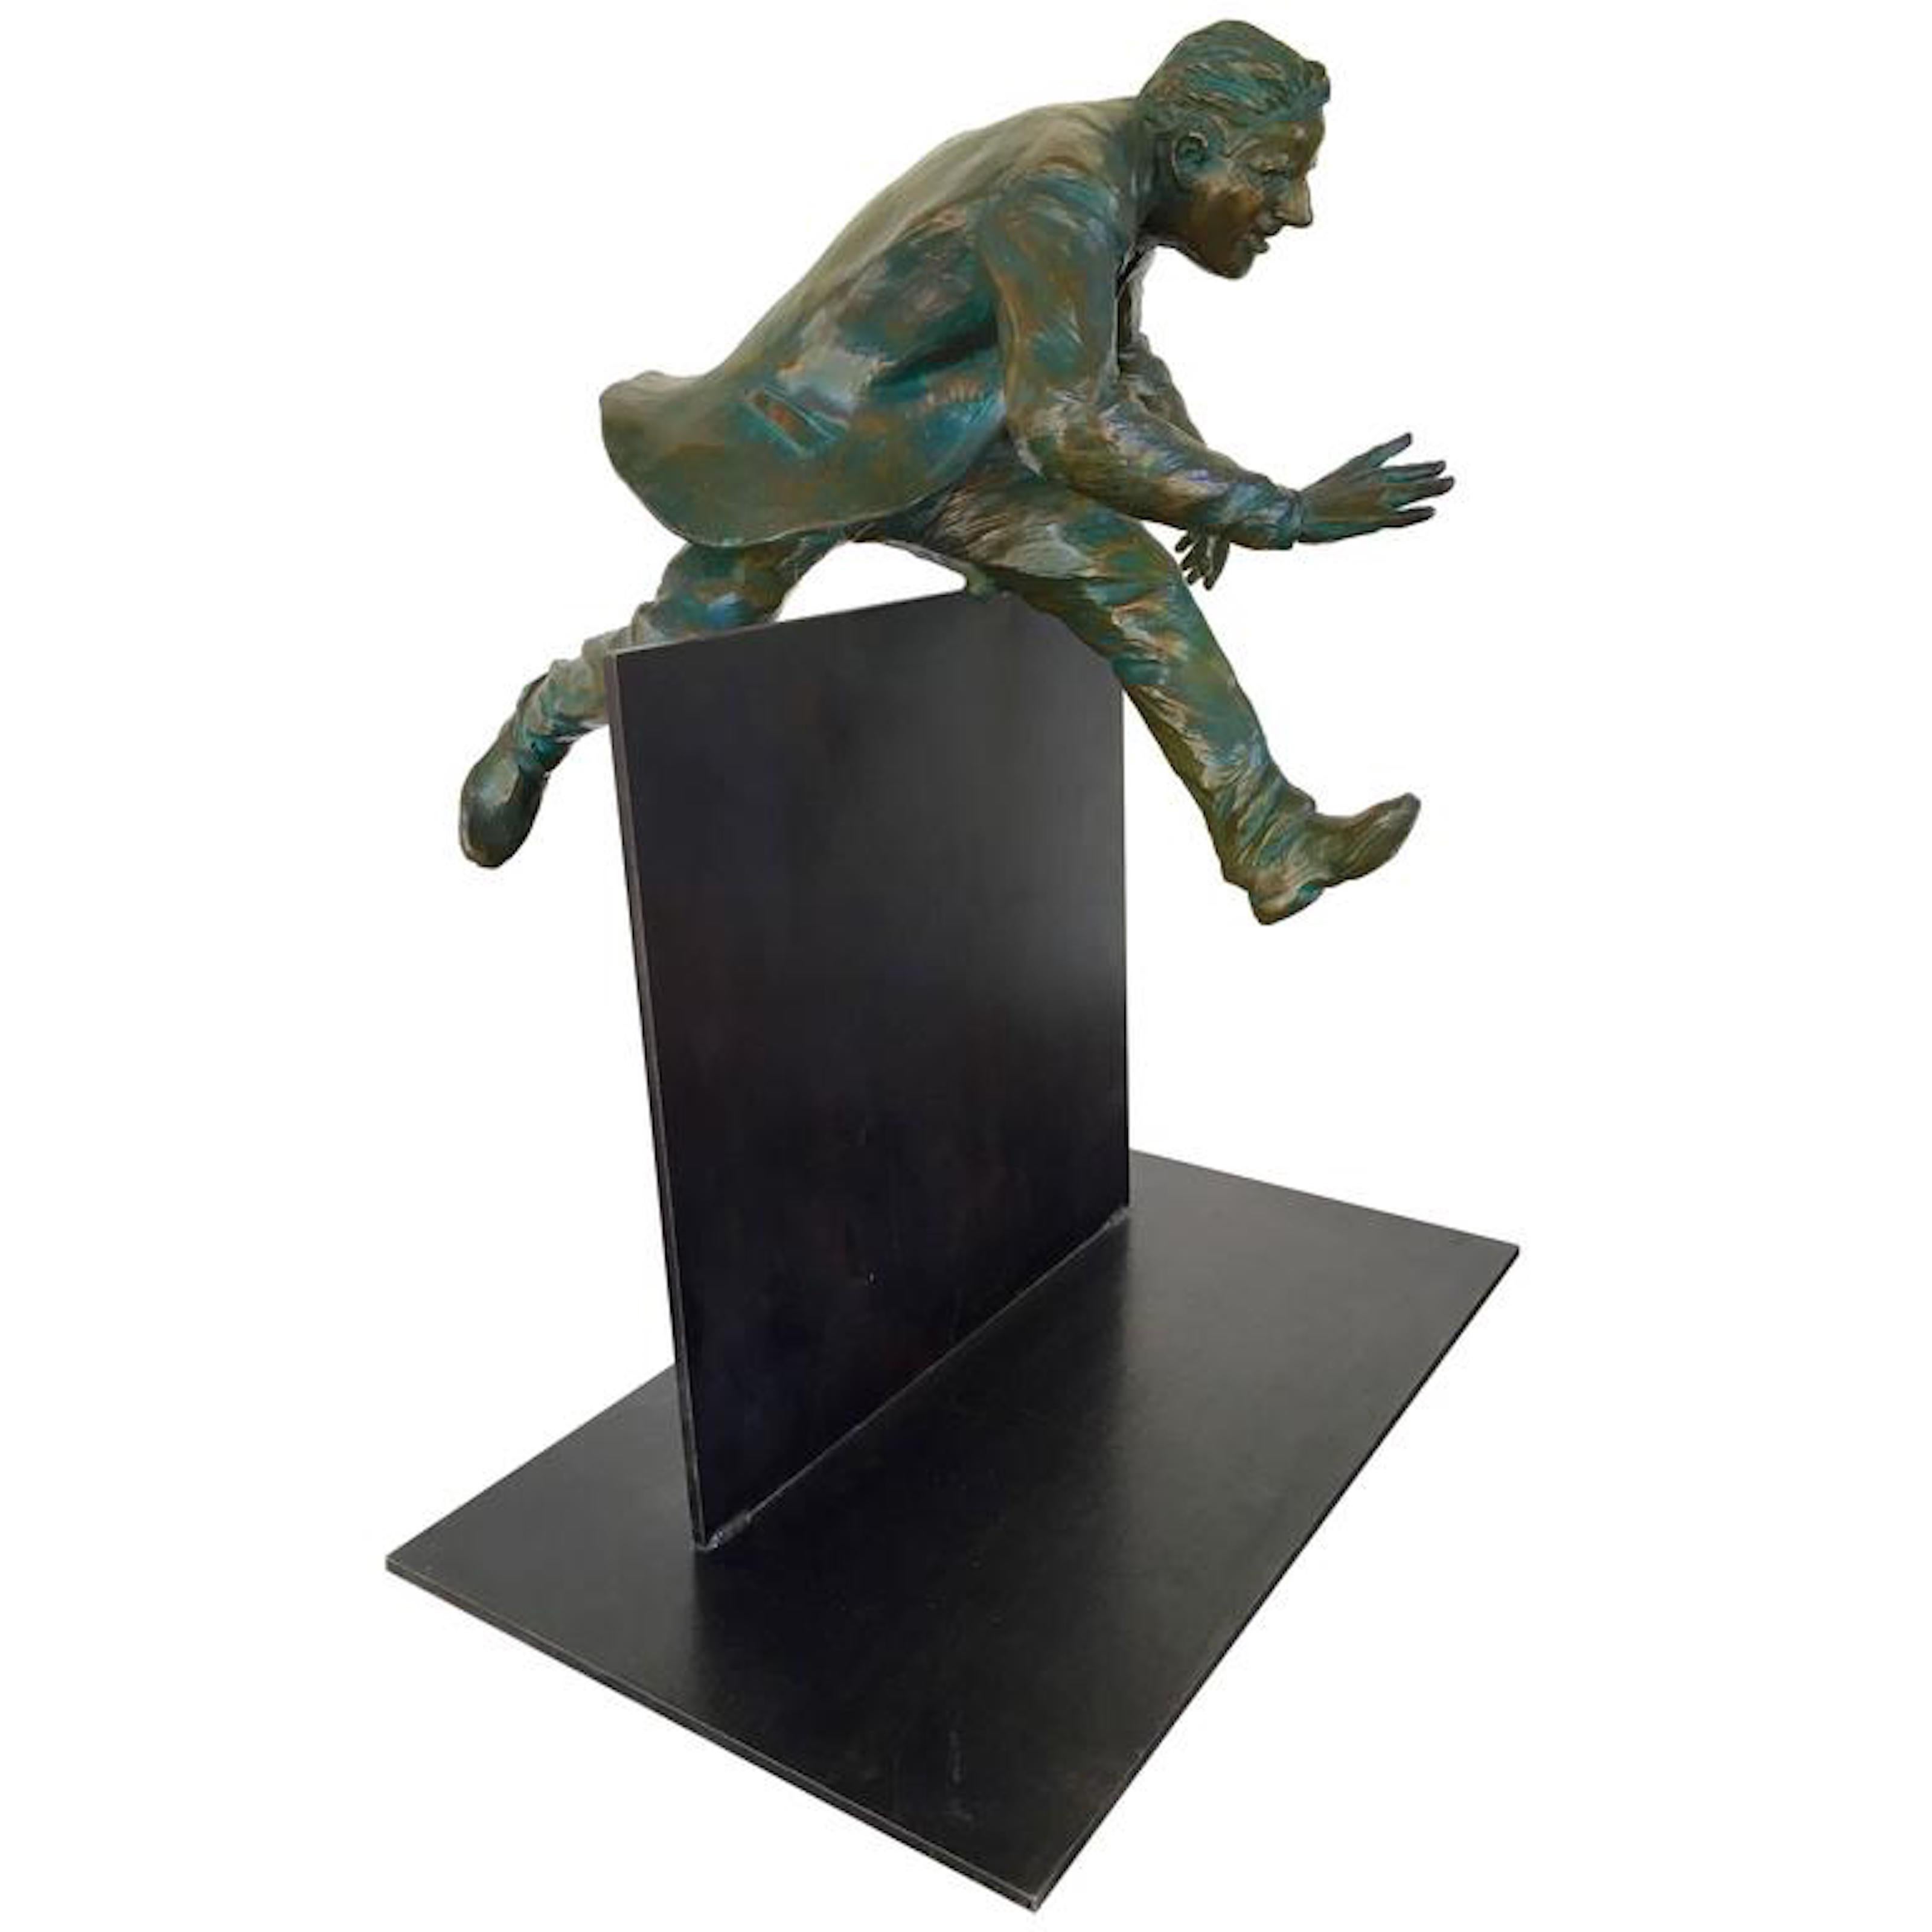 Signed and numbered. 

Jim Rennert was born in 1958 and grew up in Las Vegas, Nevada and Salt Lake City, Utah. After 10 years of working in business Jim started sculpting in 1990. He had his first bronze sculptures cast by a foundry in Lehi, Utah